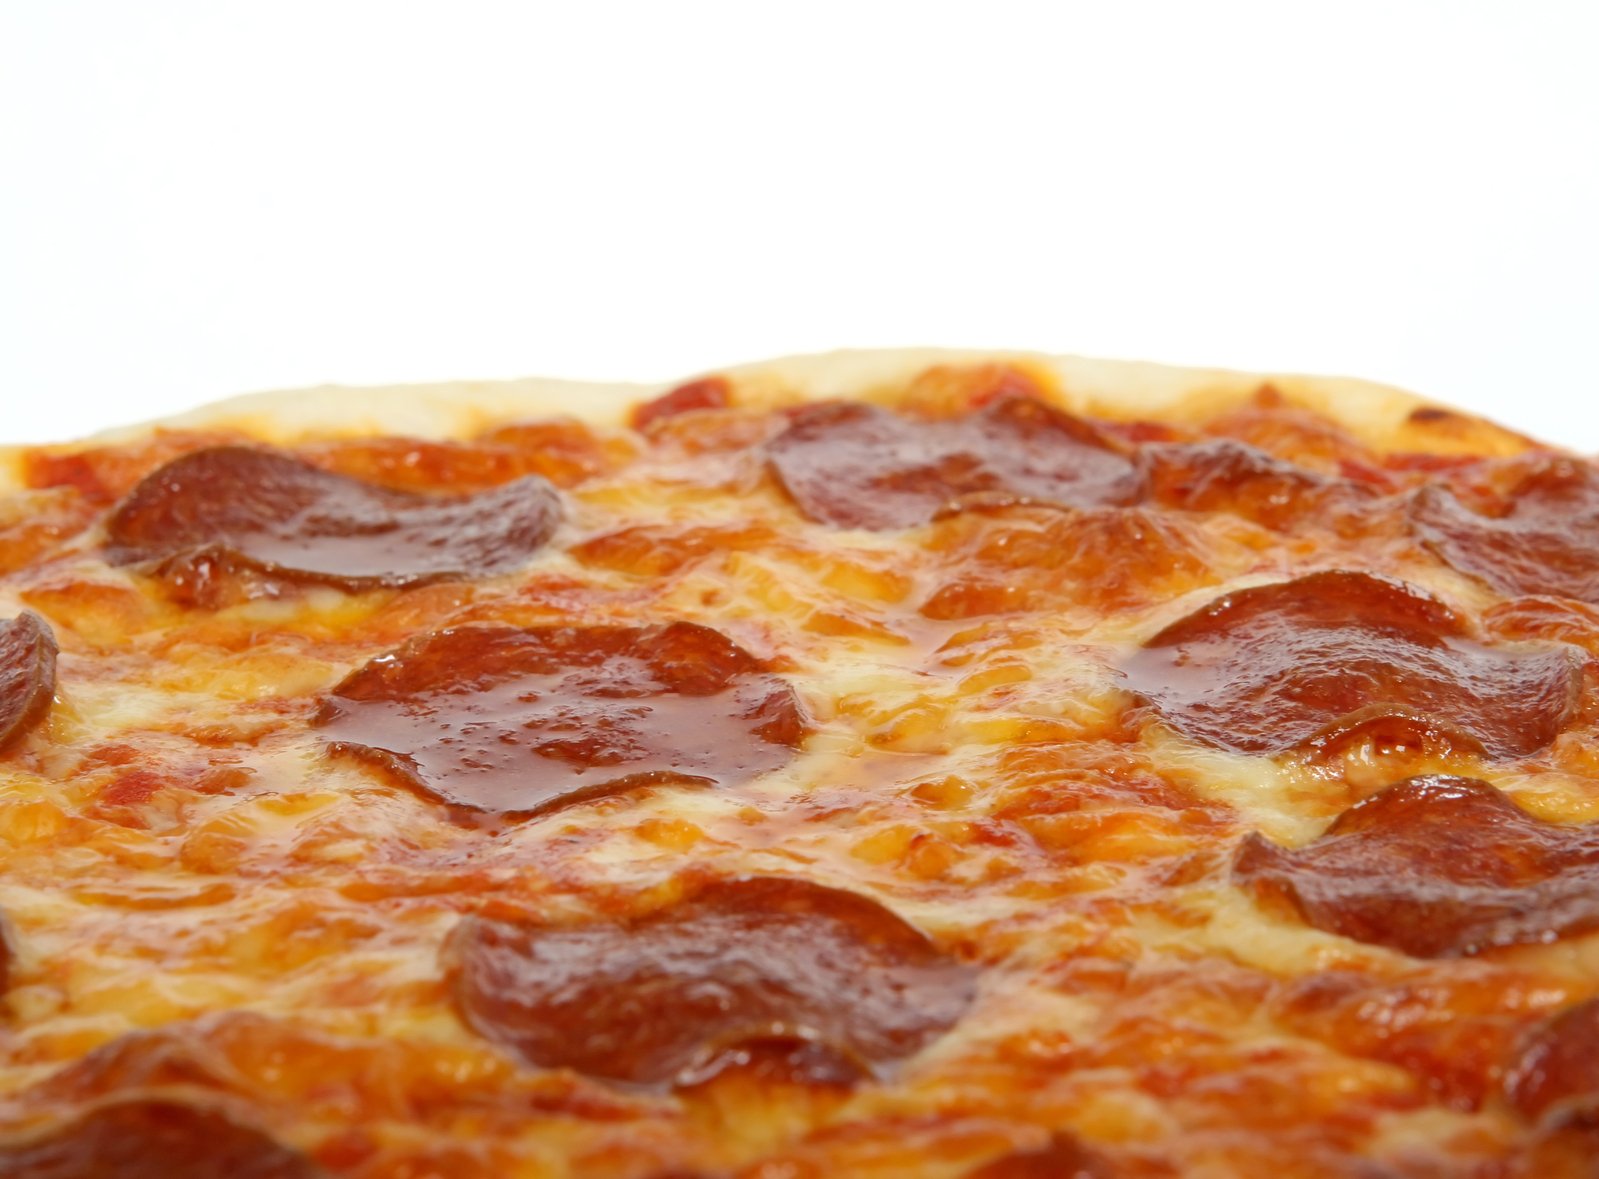 a close up view of a pepperoni pizza